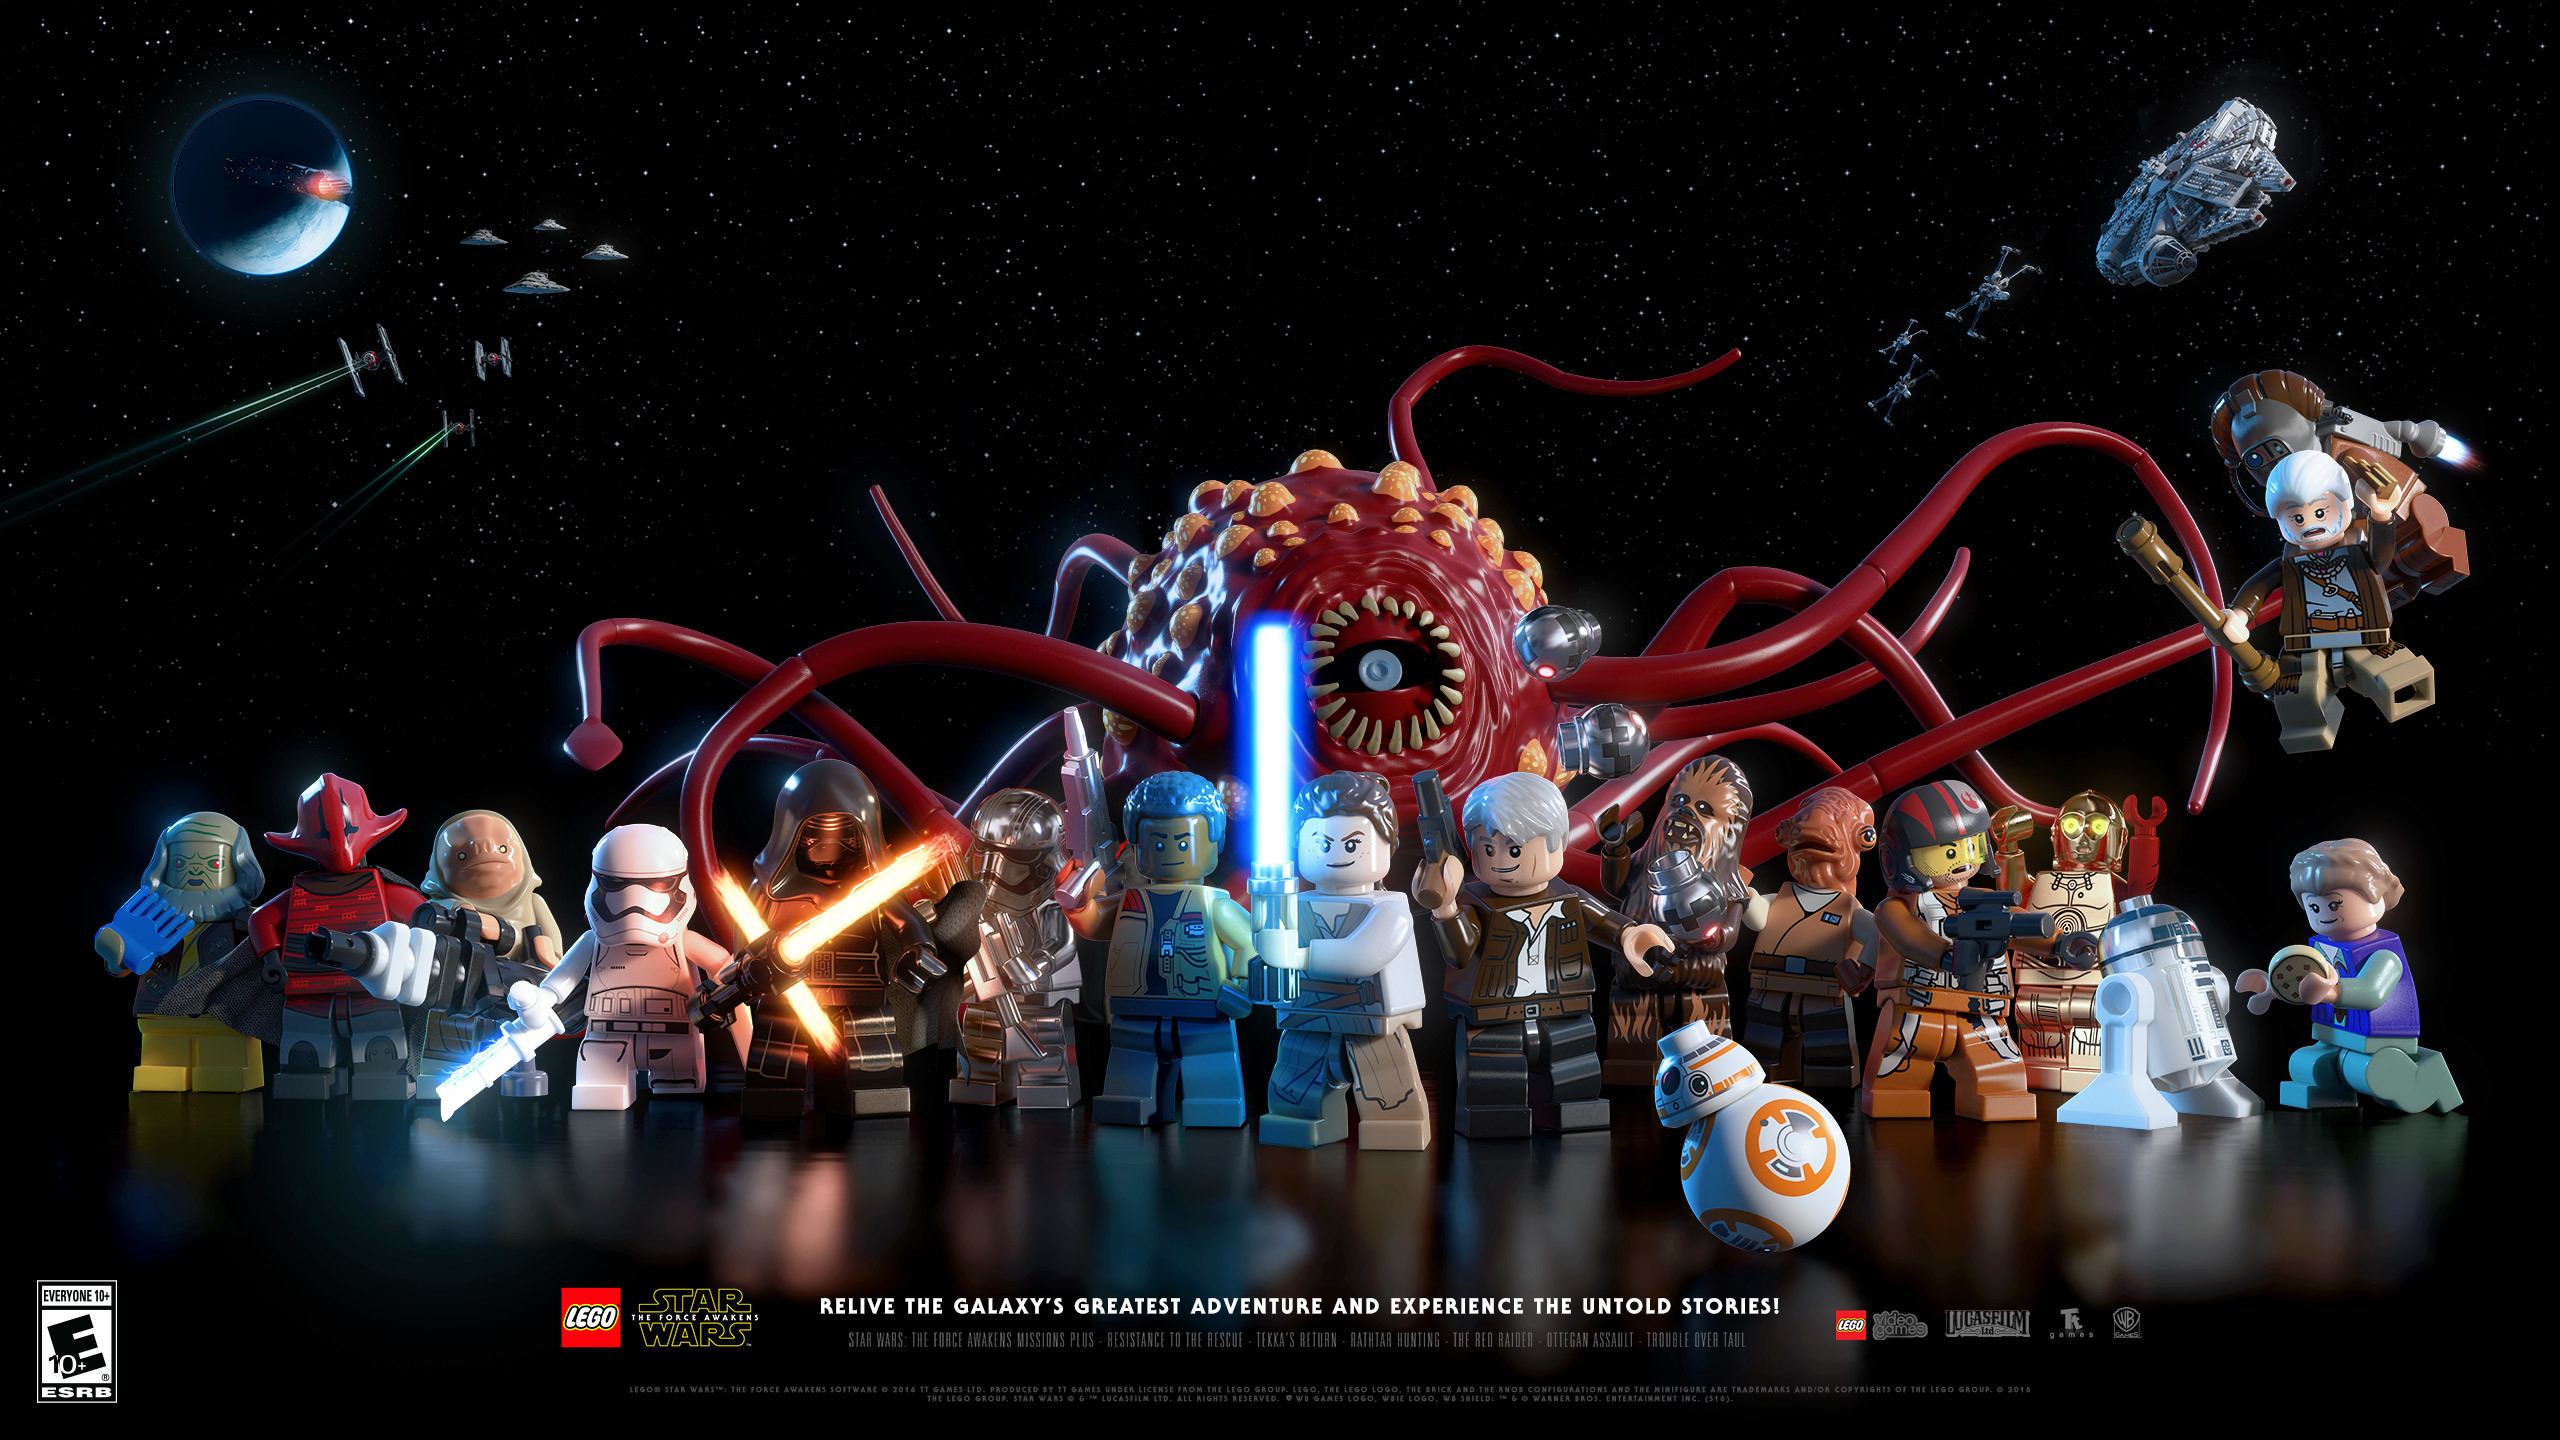 2560x1440 LEGO Star Wars: The Force Awakens Video Game